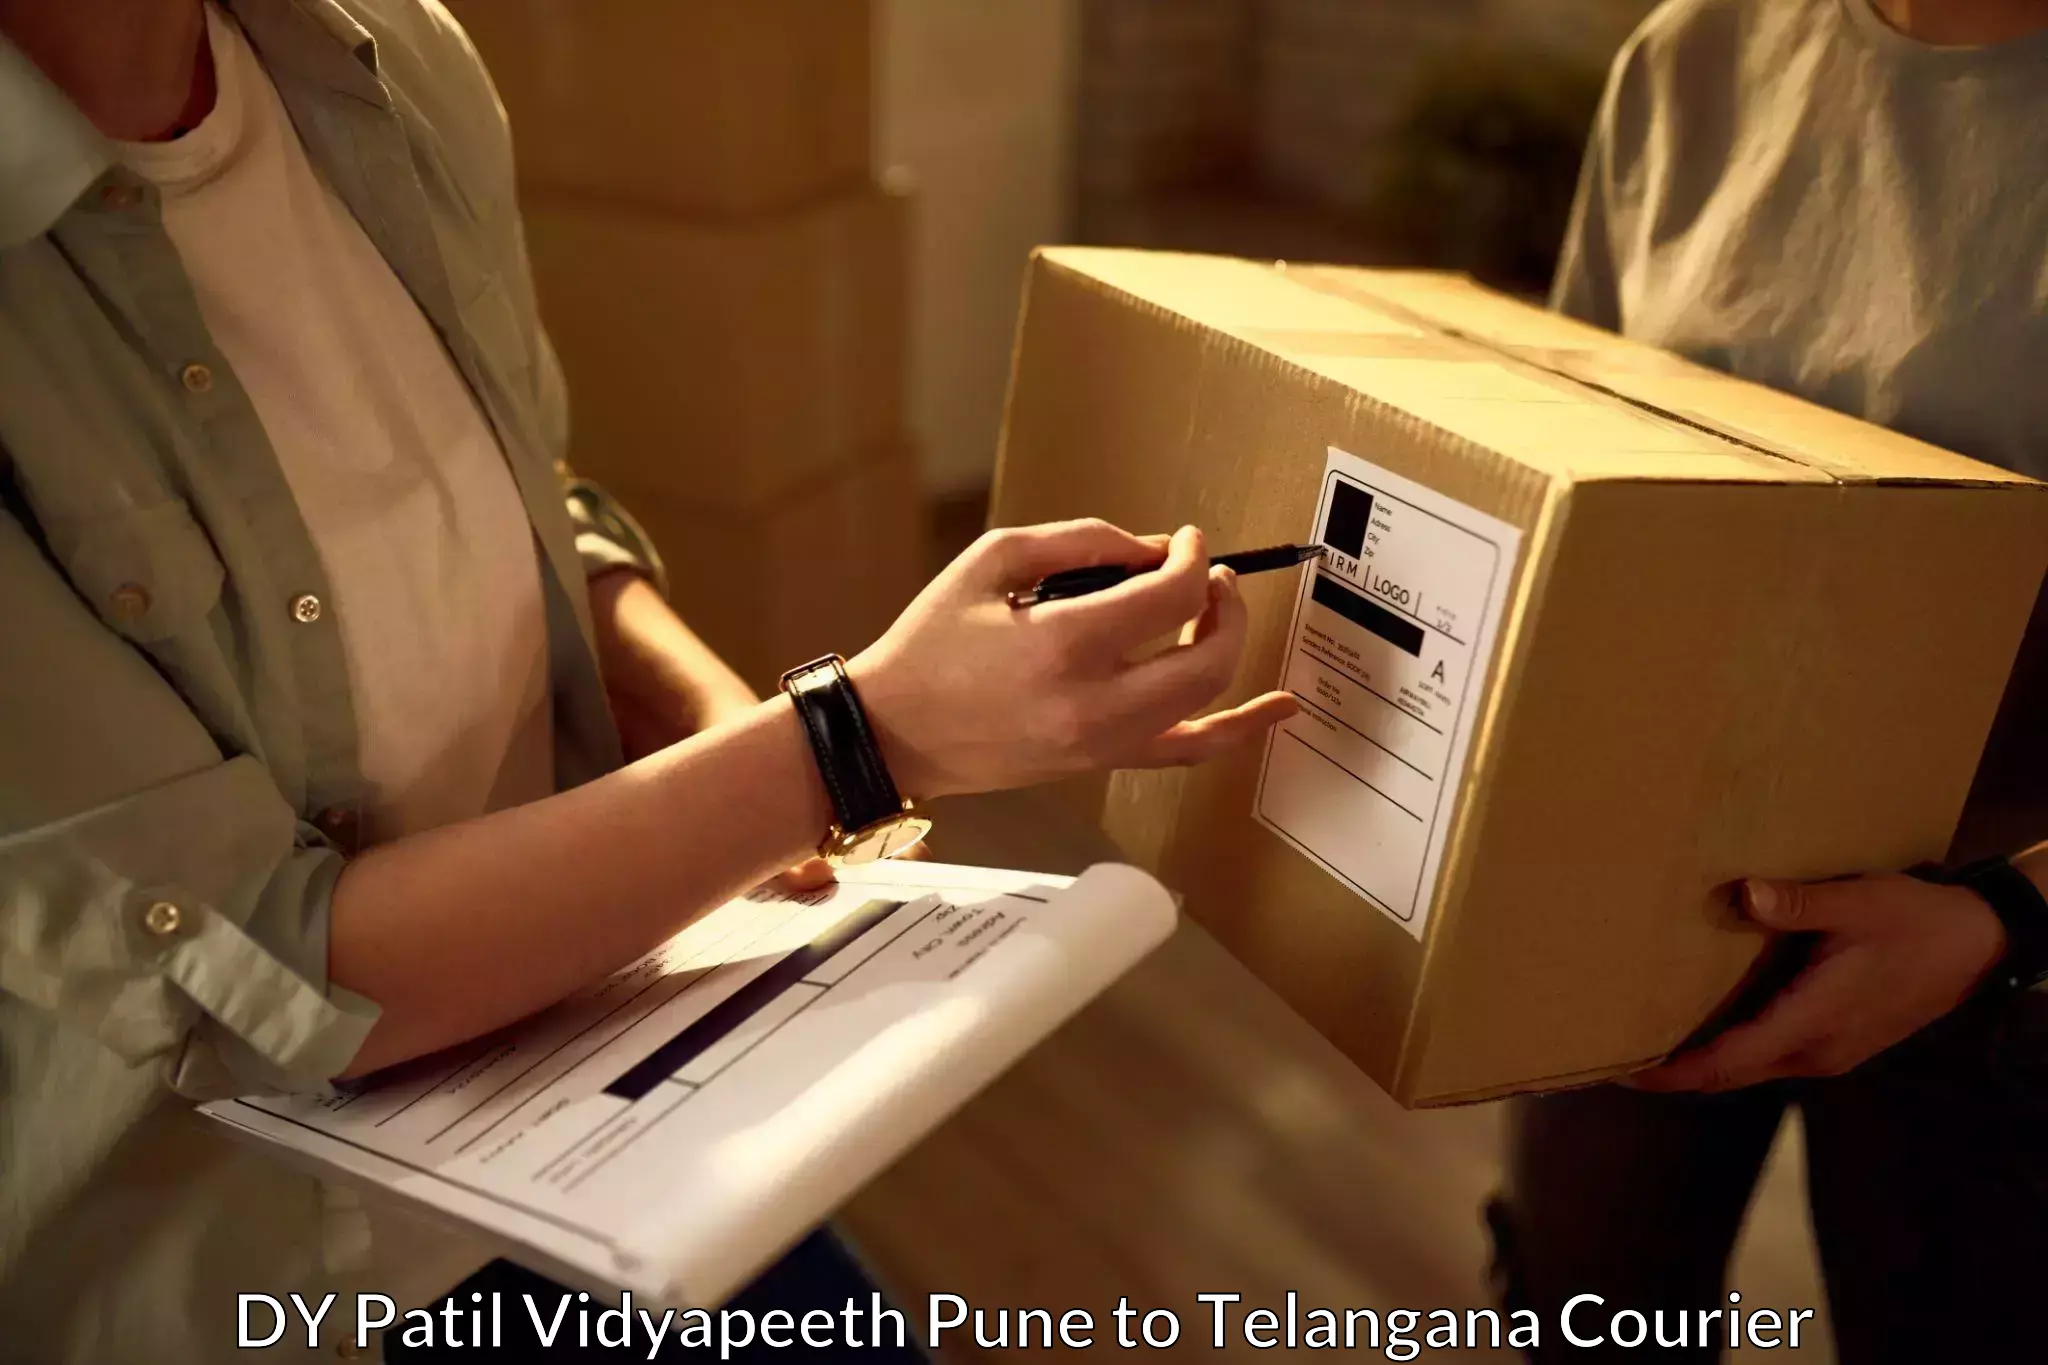 User-friendly courier app DY Patil Vidyapeeth Pune to Siddipet